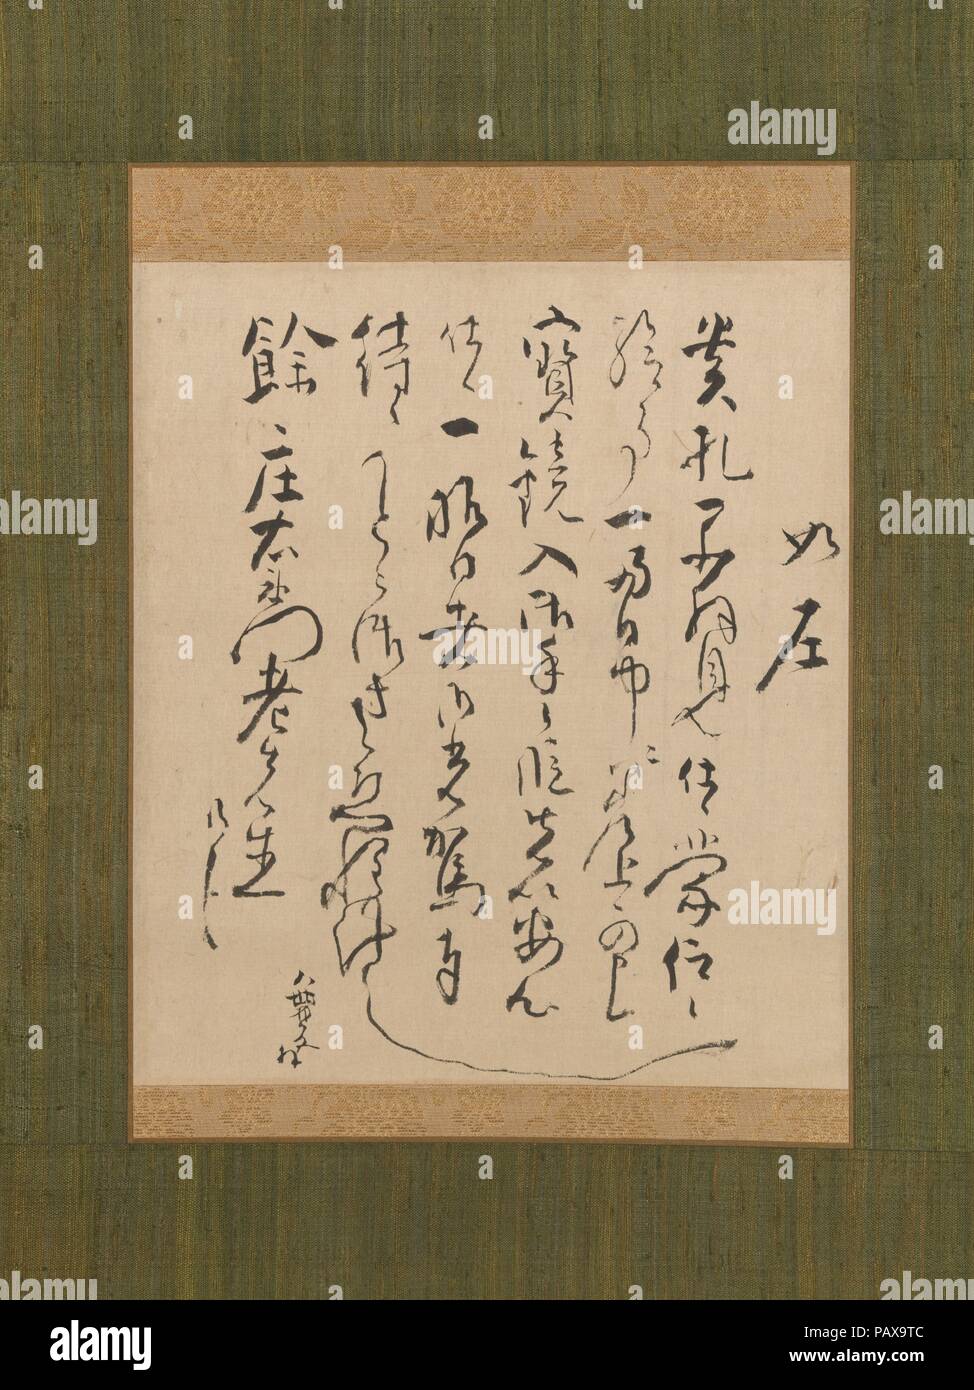 Letter Addressed to Yo Shoemon. Calligrapher: Ike Taiga (Japanese, 1723-1776). Culture: Japan. Dimensions: Image: 9 5/16 × 8 1/8 in. (23.6 × 20.6 cm)  Overall with mounting: 42 15/16 × 13 11/16 in. (109 × 34.8 cm)  Overall with knobs: 42 15/16 × 15 3/4 in. (109 × 40 cm). Date: 18th century. Museum: Metropolitan Museum of Art, New York, USA. Stock Photo